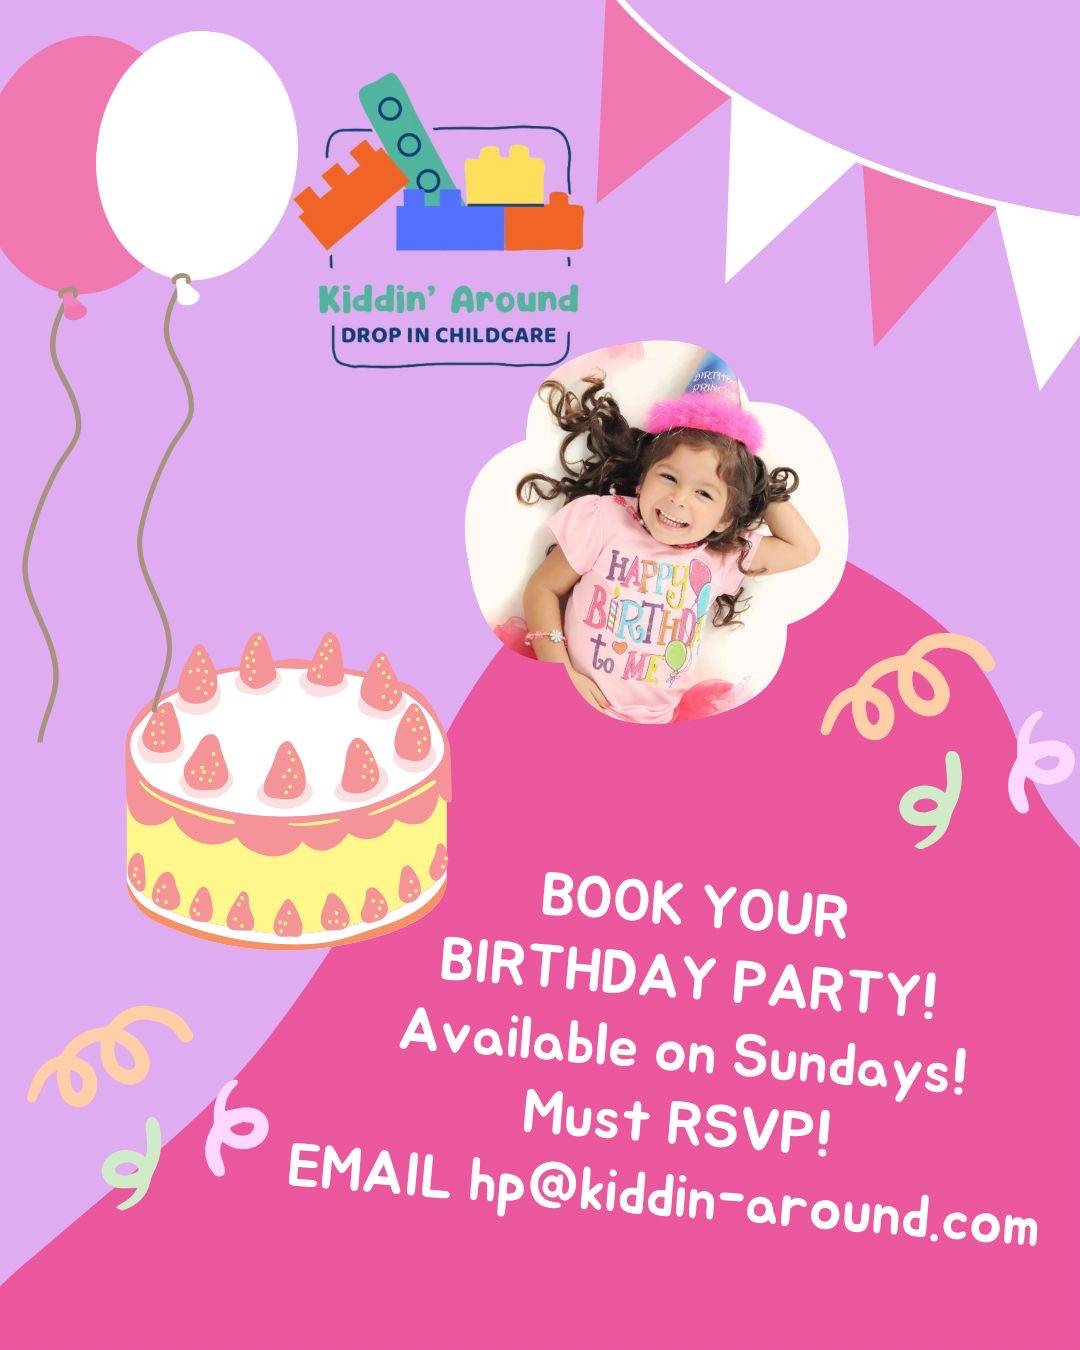 Birthday party poster